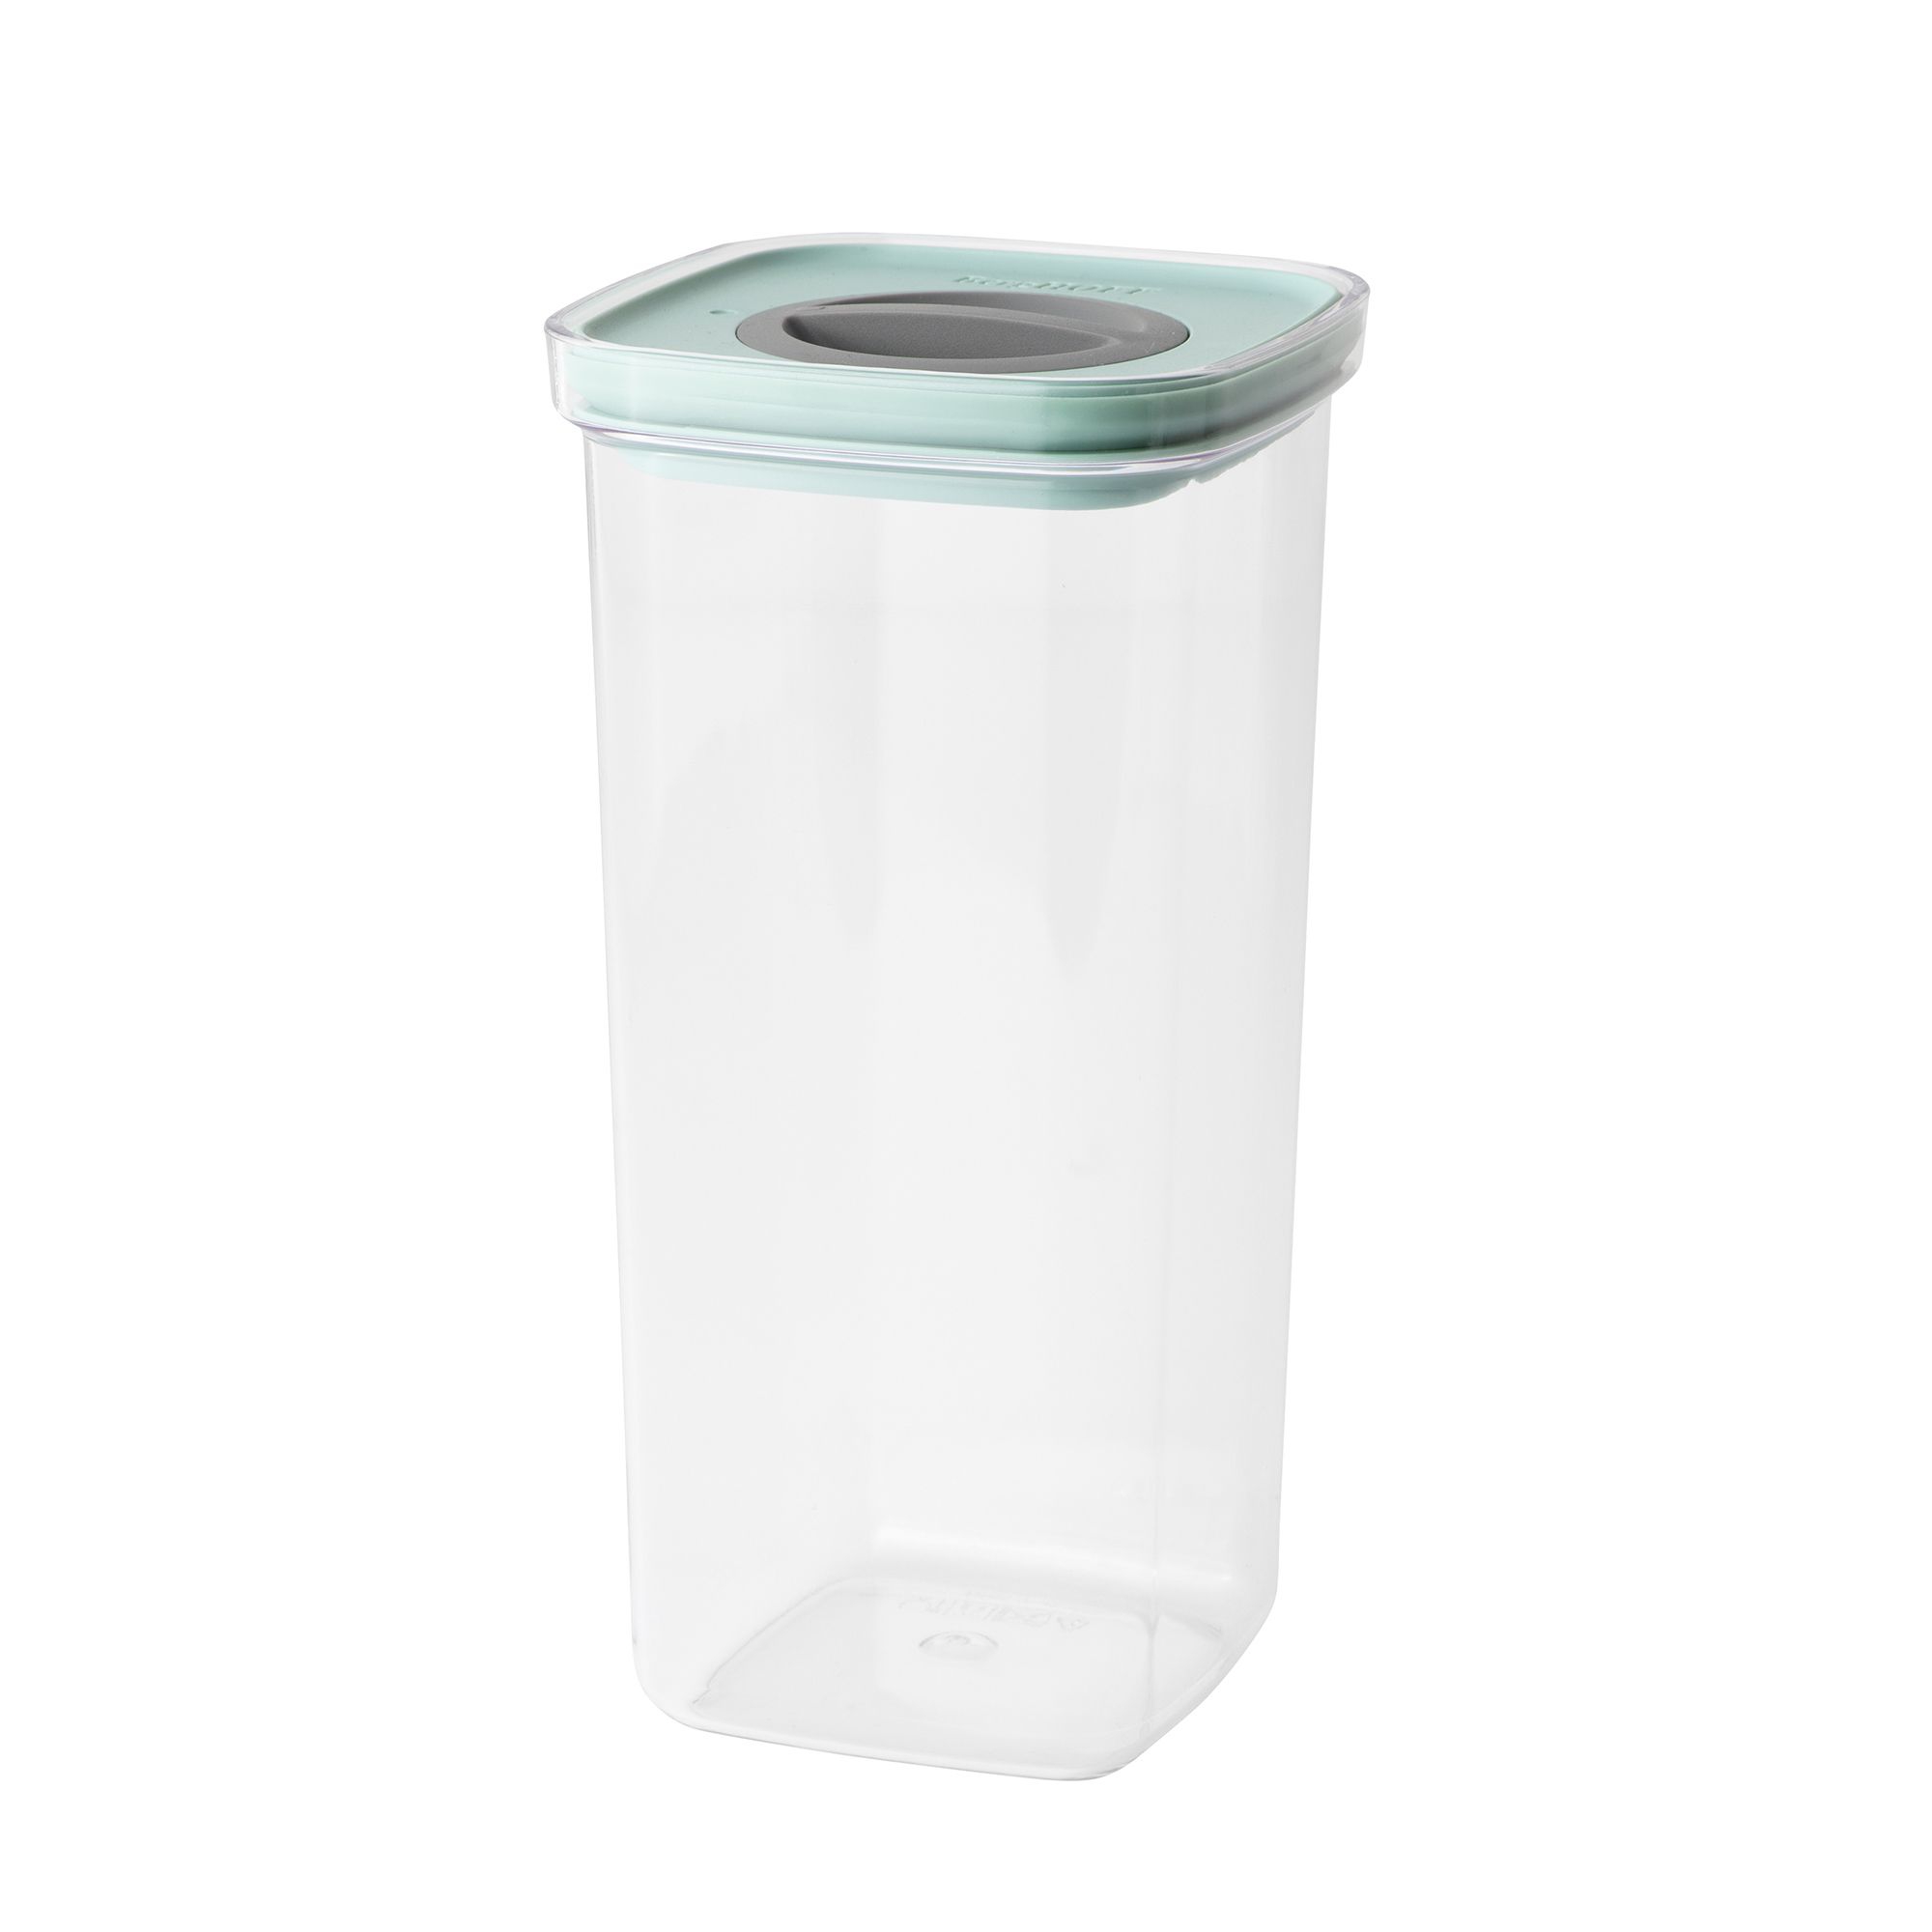 BergHOFF Leo 1.7 qt Smart Seal Food Container, Green